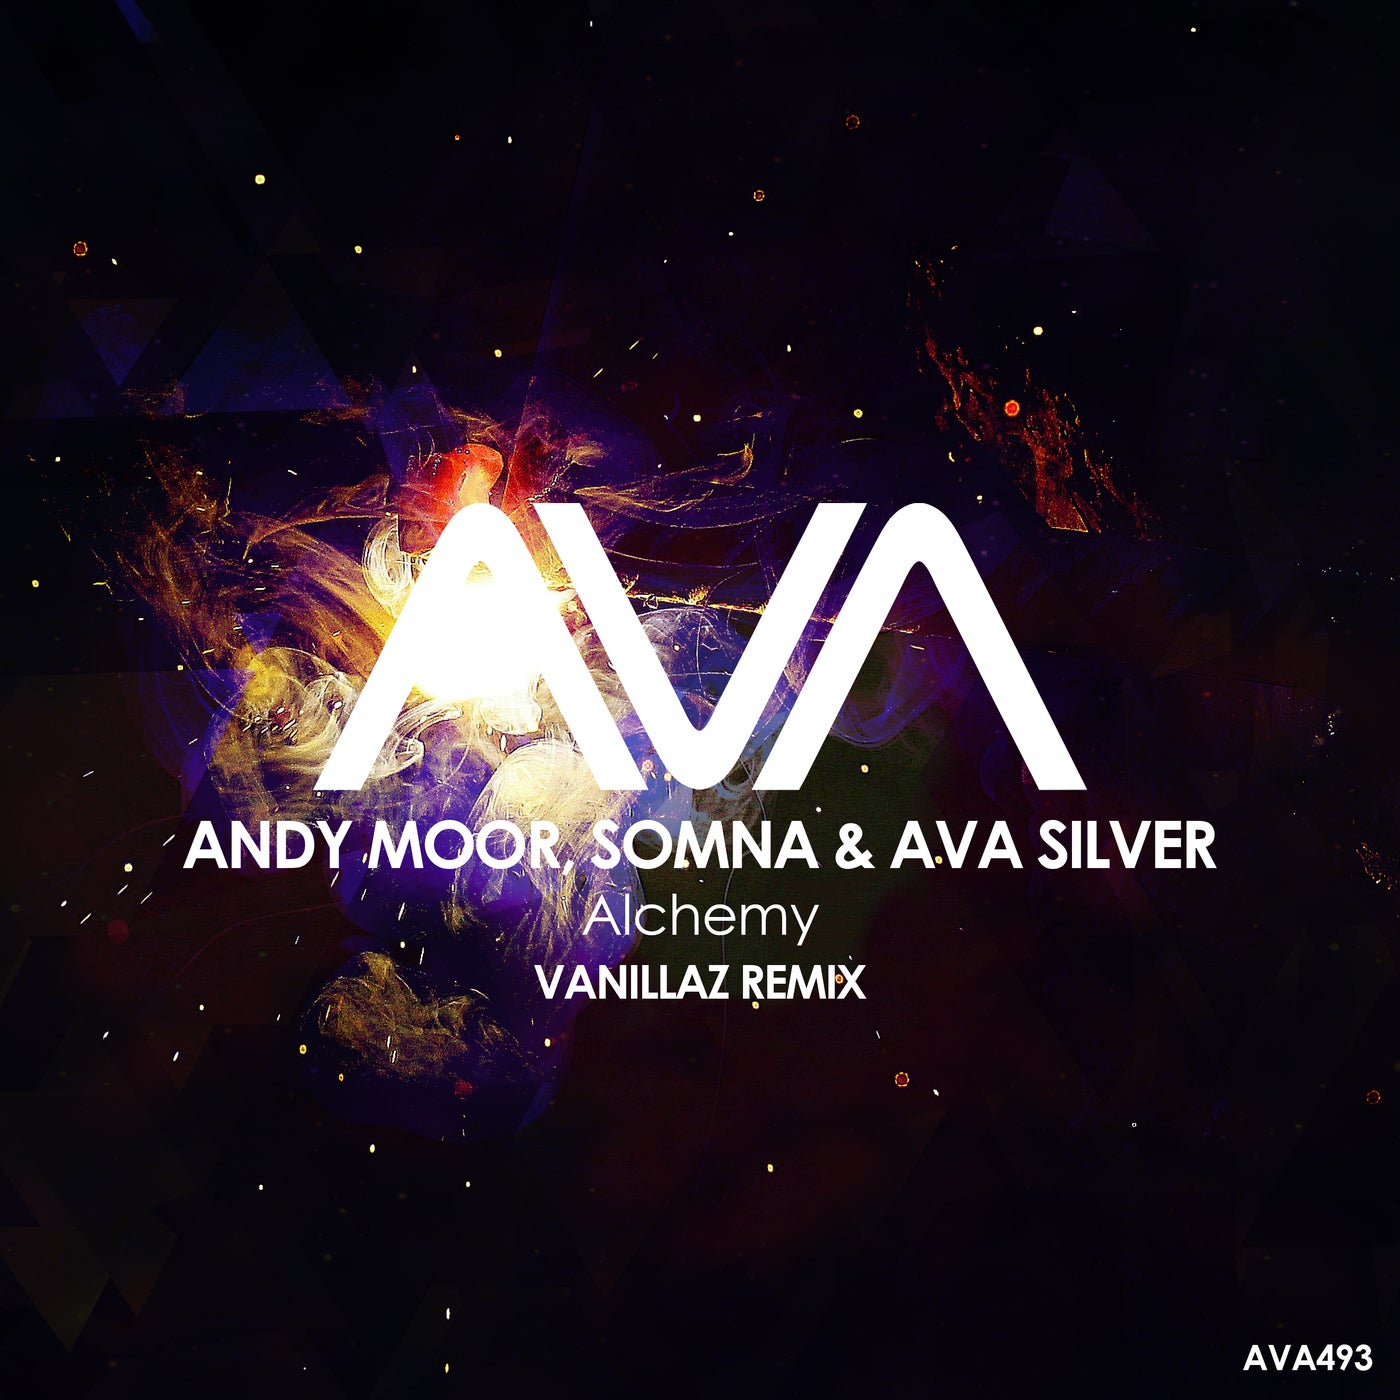 Cover - Andy Moor, Somna, Ava Silver - Alchemy (Vanillaz Extended Remix)